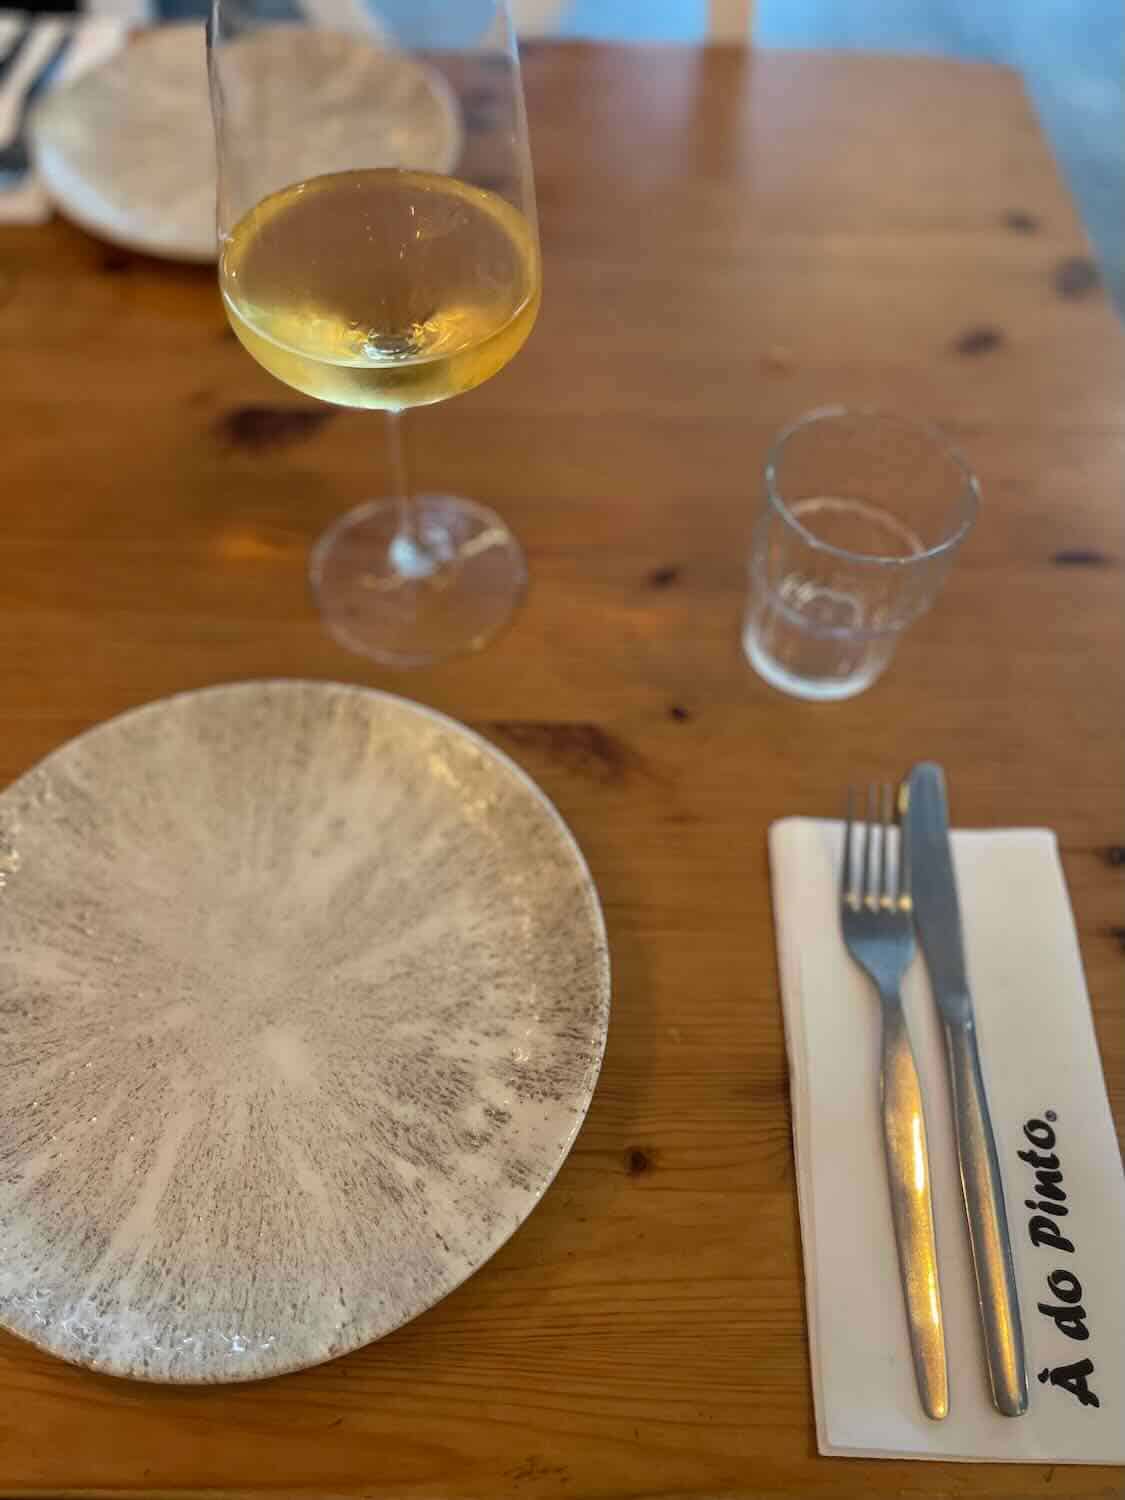 A glass of white wine on a wooden table beside a textured ceramic plate, with cutlery on a napkin reading 'A do Pinto,' suggesting an inviting dining experience.